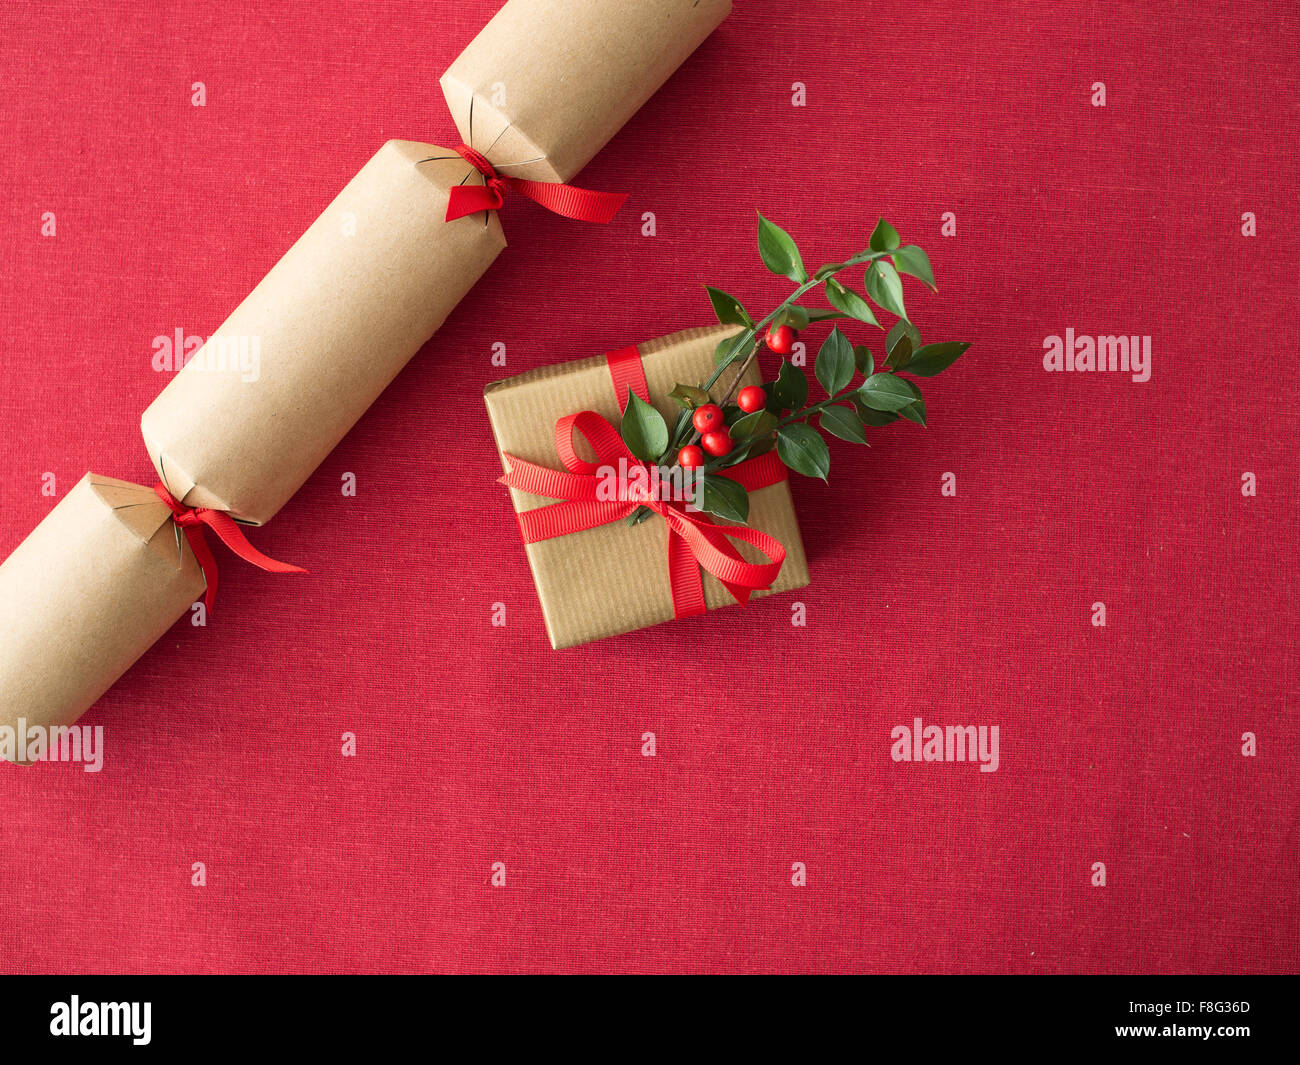 Christmas cracker and present on red tablecloth background food concept Stock Photo